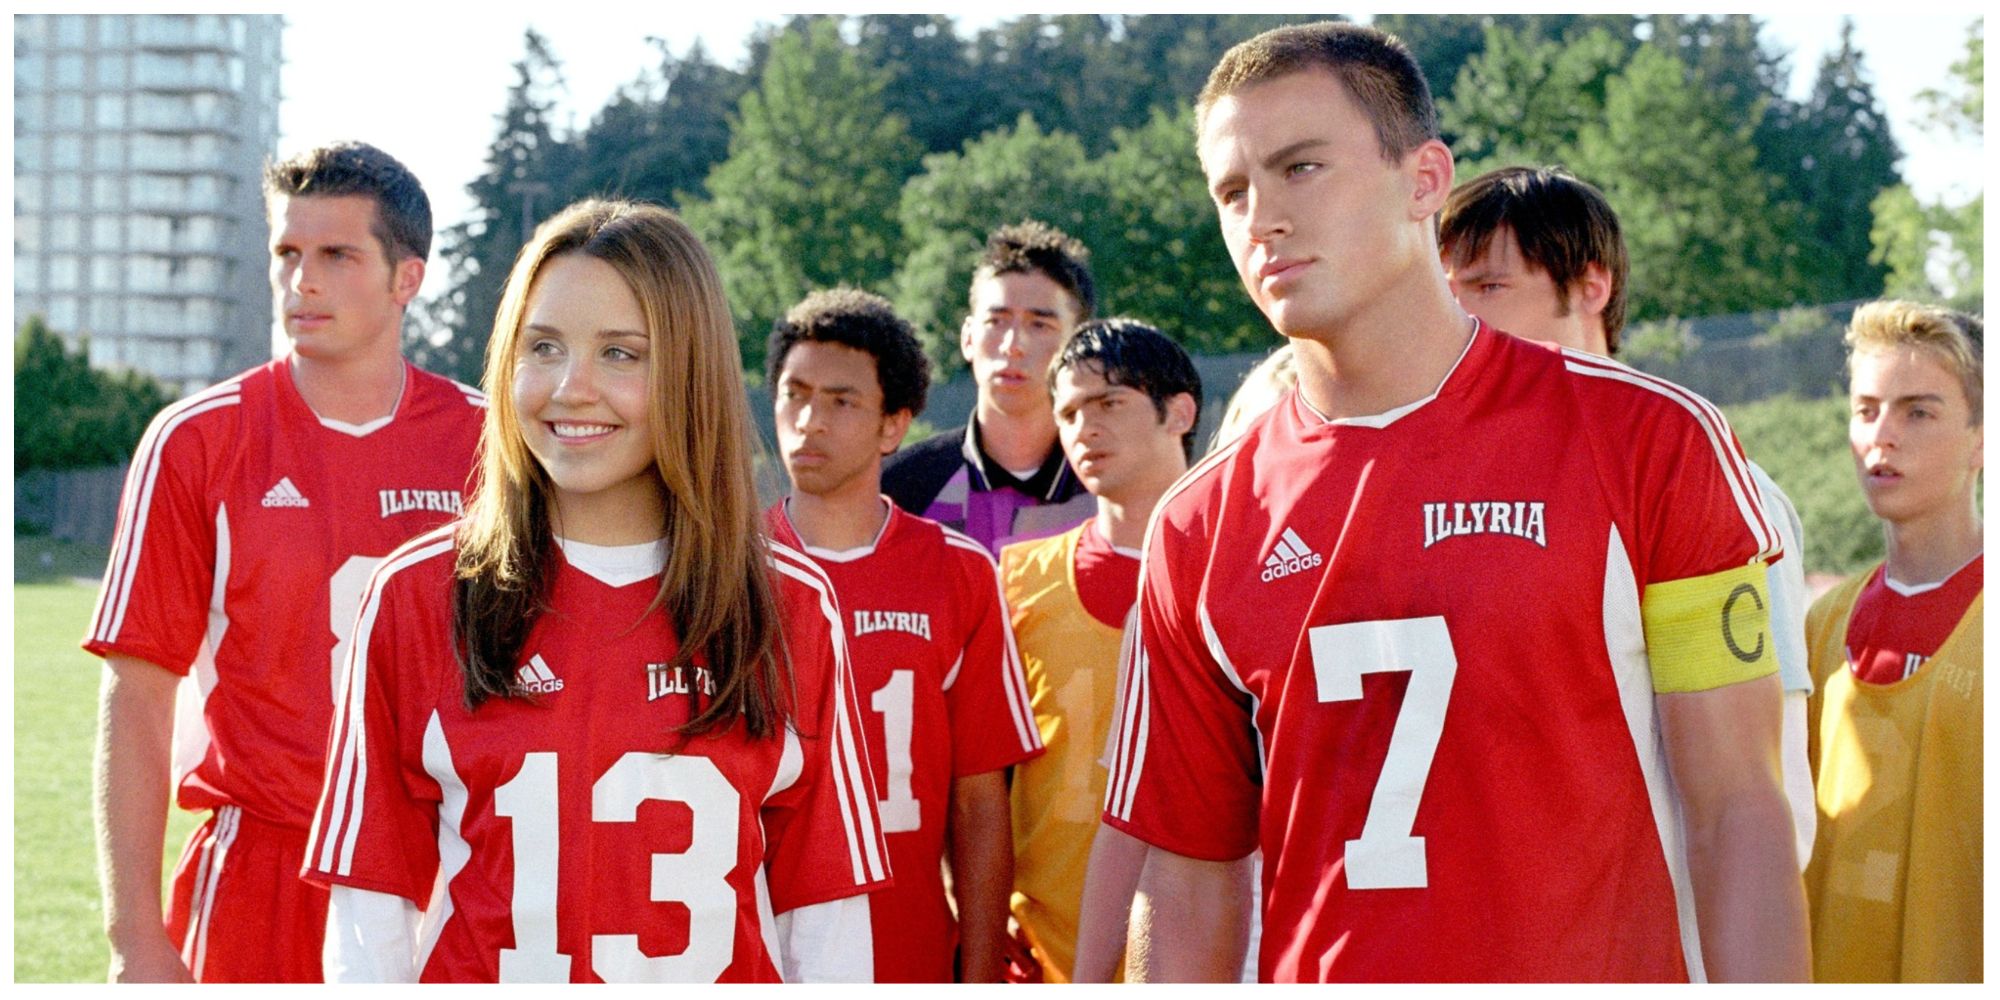 Viola and Duke standing on the football pitch with supporting cast in She's The Man.